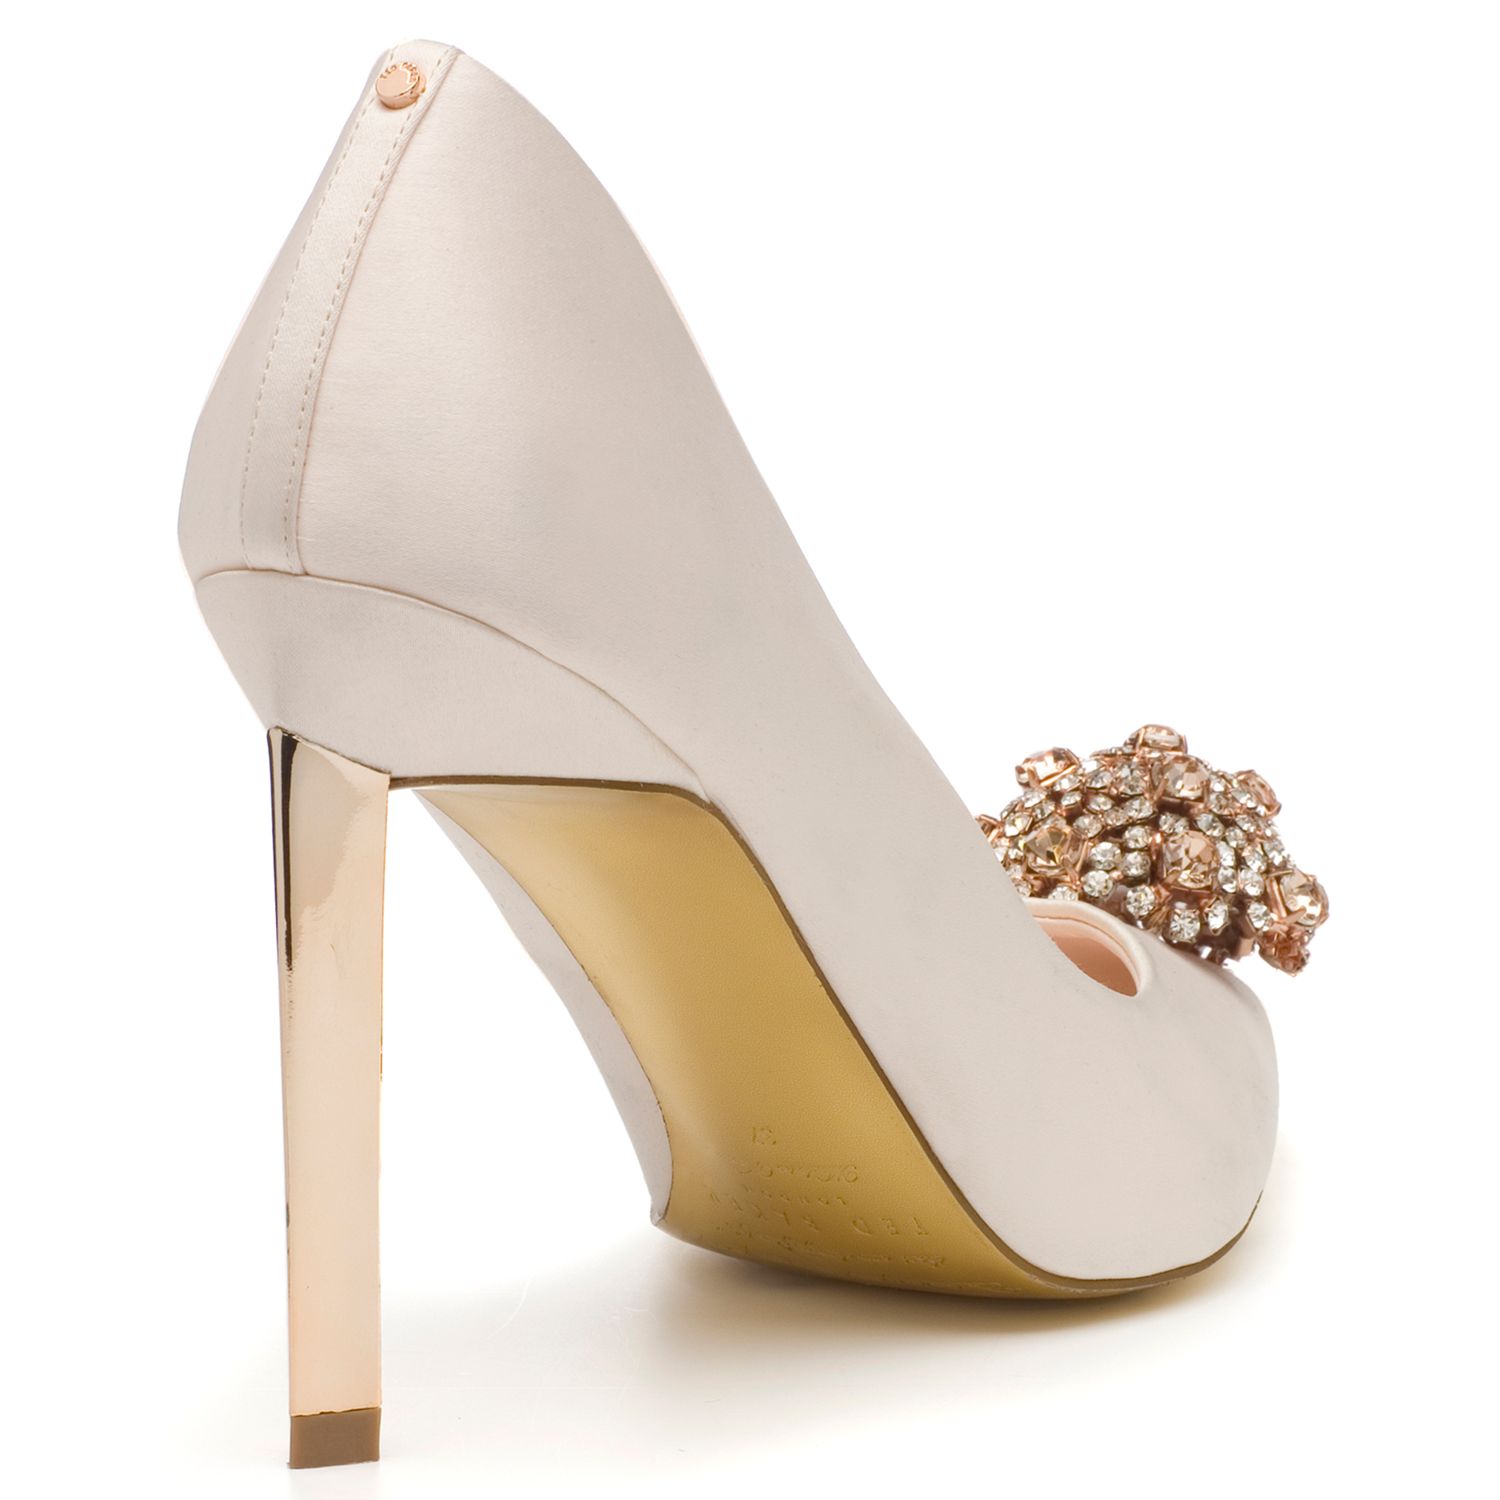 Ted Baker Peetch Court Shoes, Nude Satin